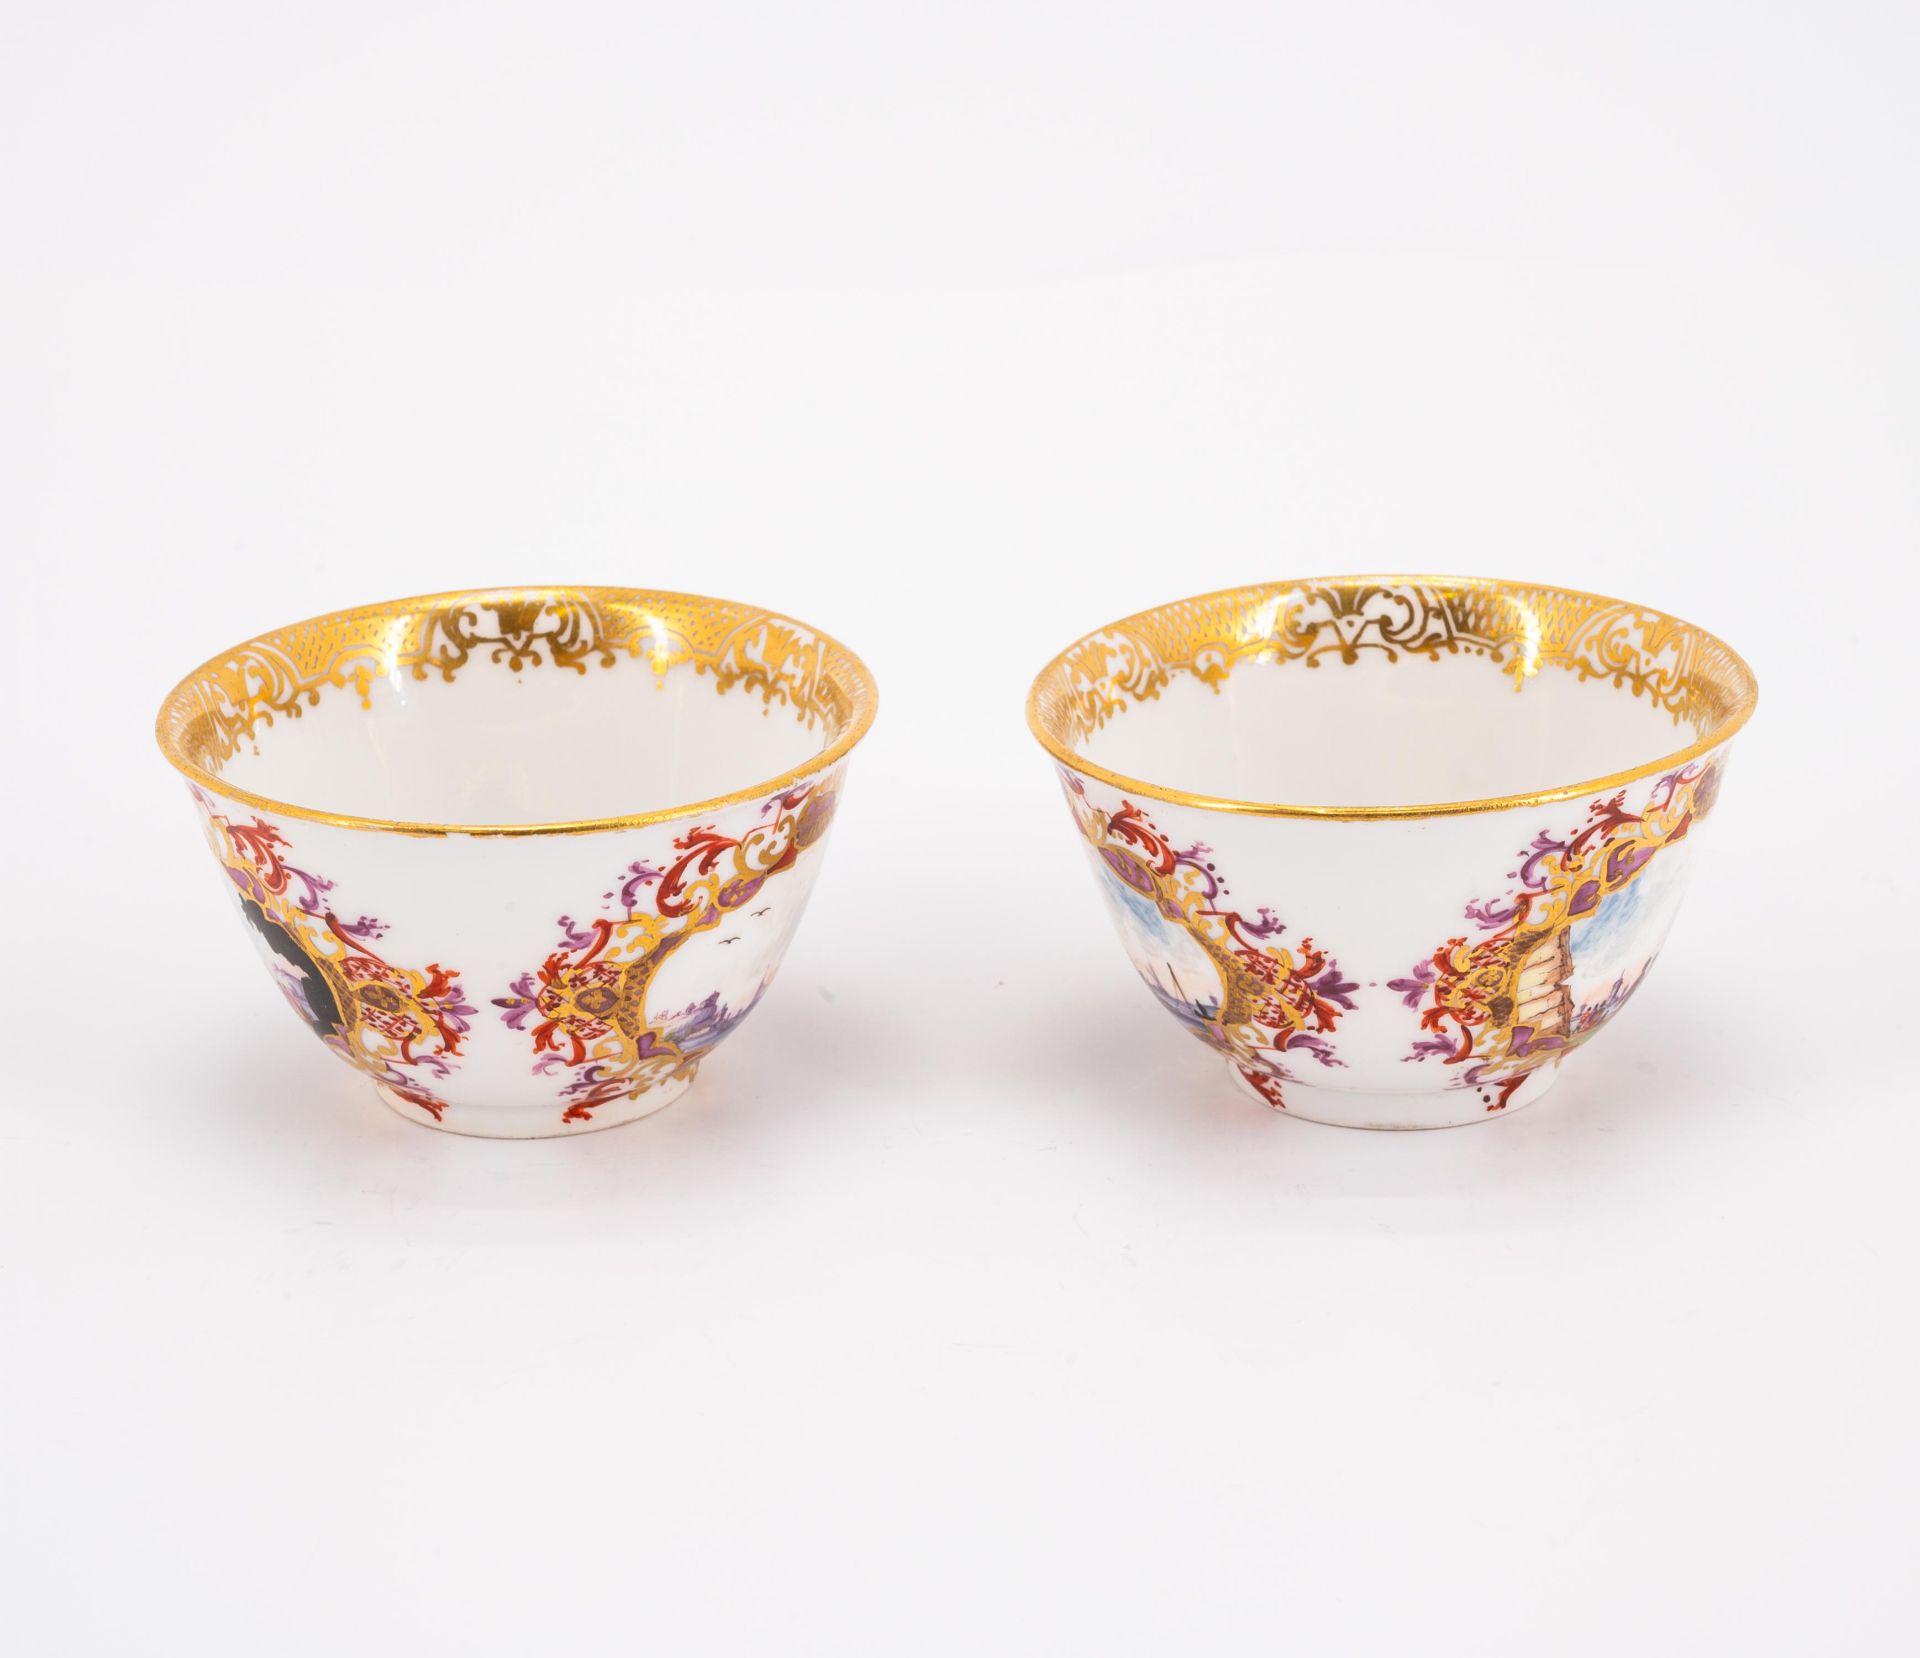 Meissen: PAIR OF PORCELAIN TEA BOWLS AND SAUCERS WITH MERCHANT NAVY SCENES - Image 2 of 8